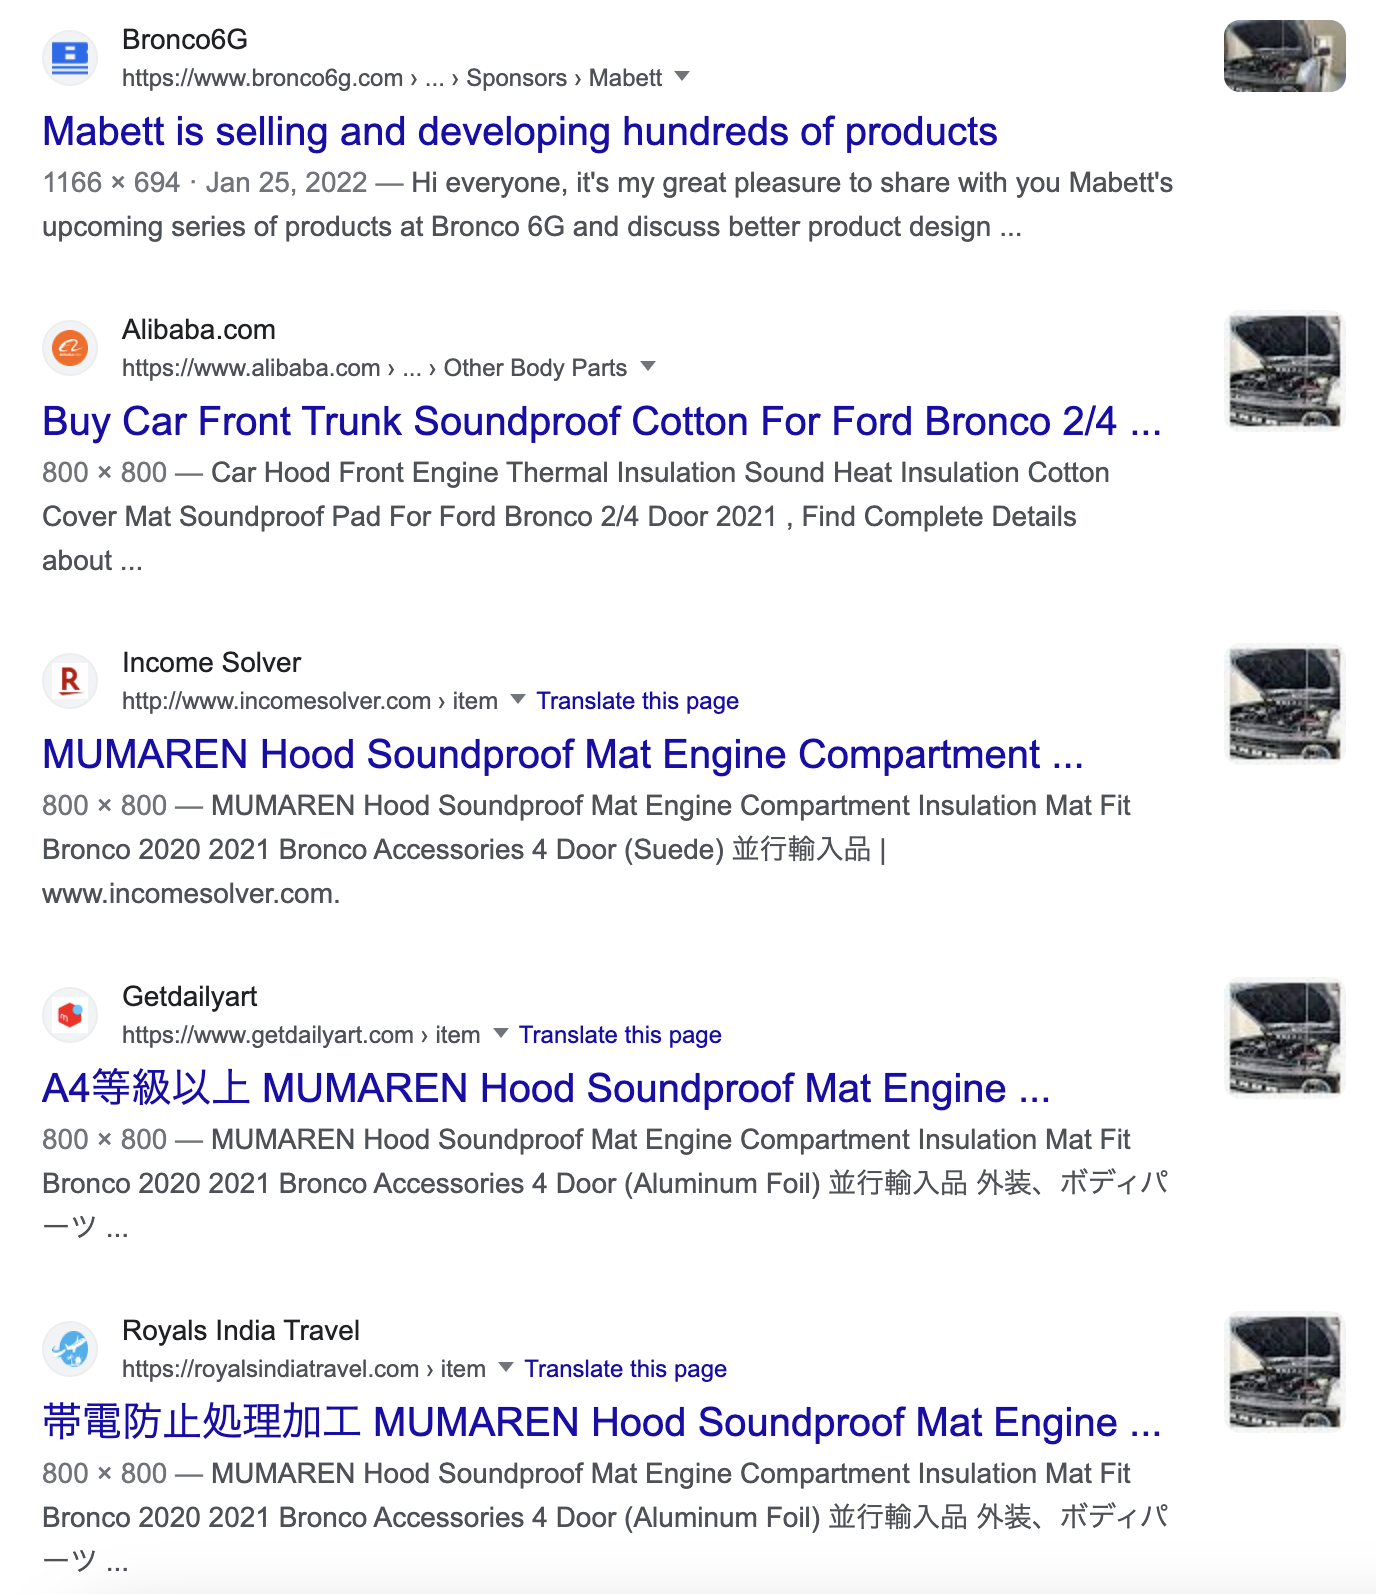 Ford Bronco Mabett products, buyer beware. Screenshot 2023-05-05 at 12.21.53 PM